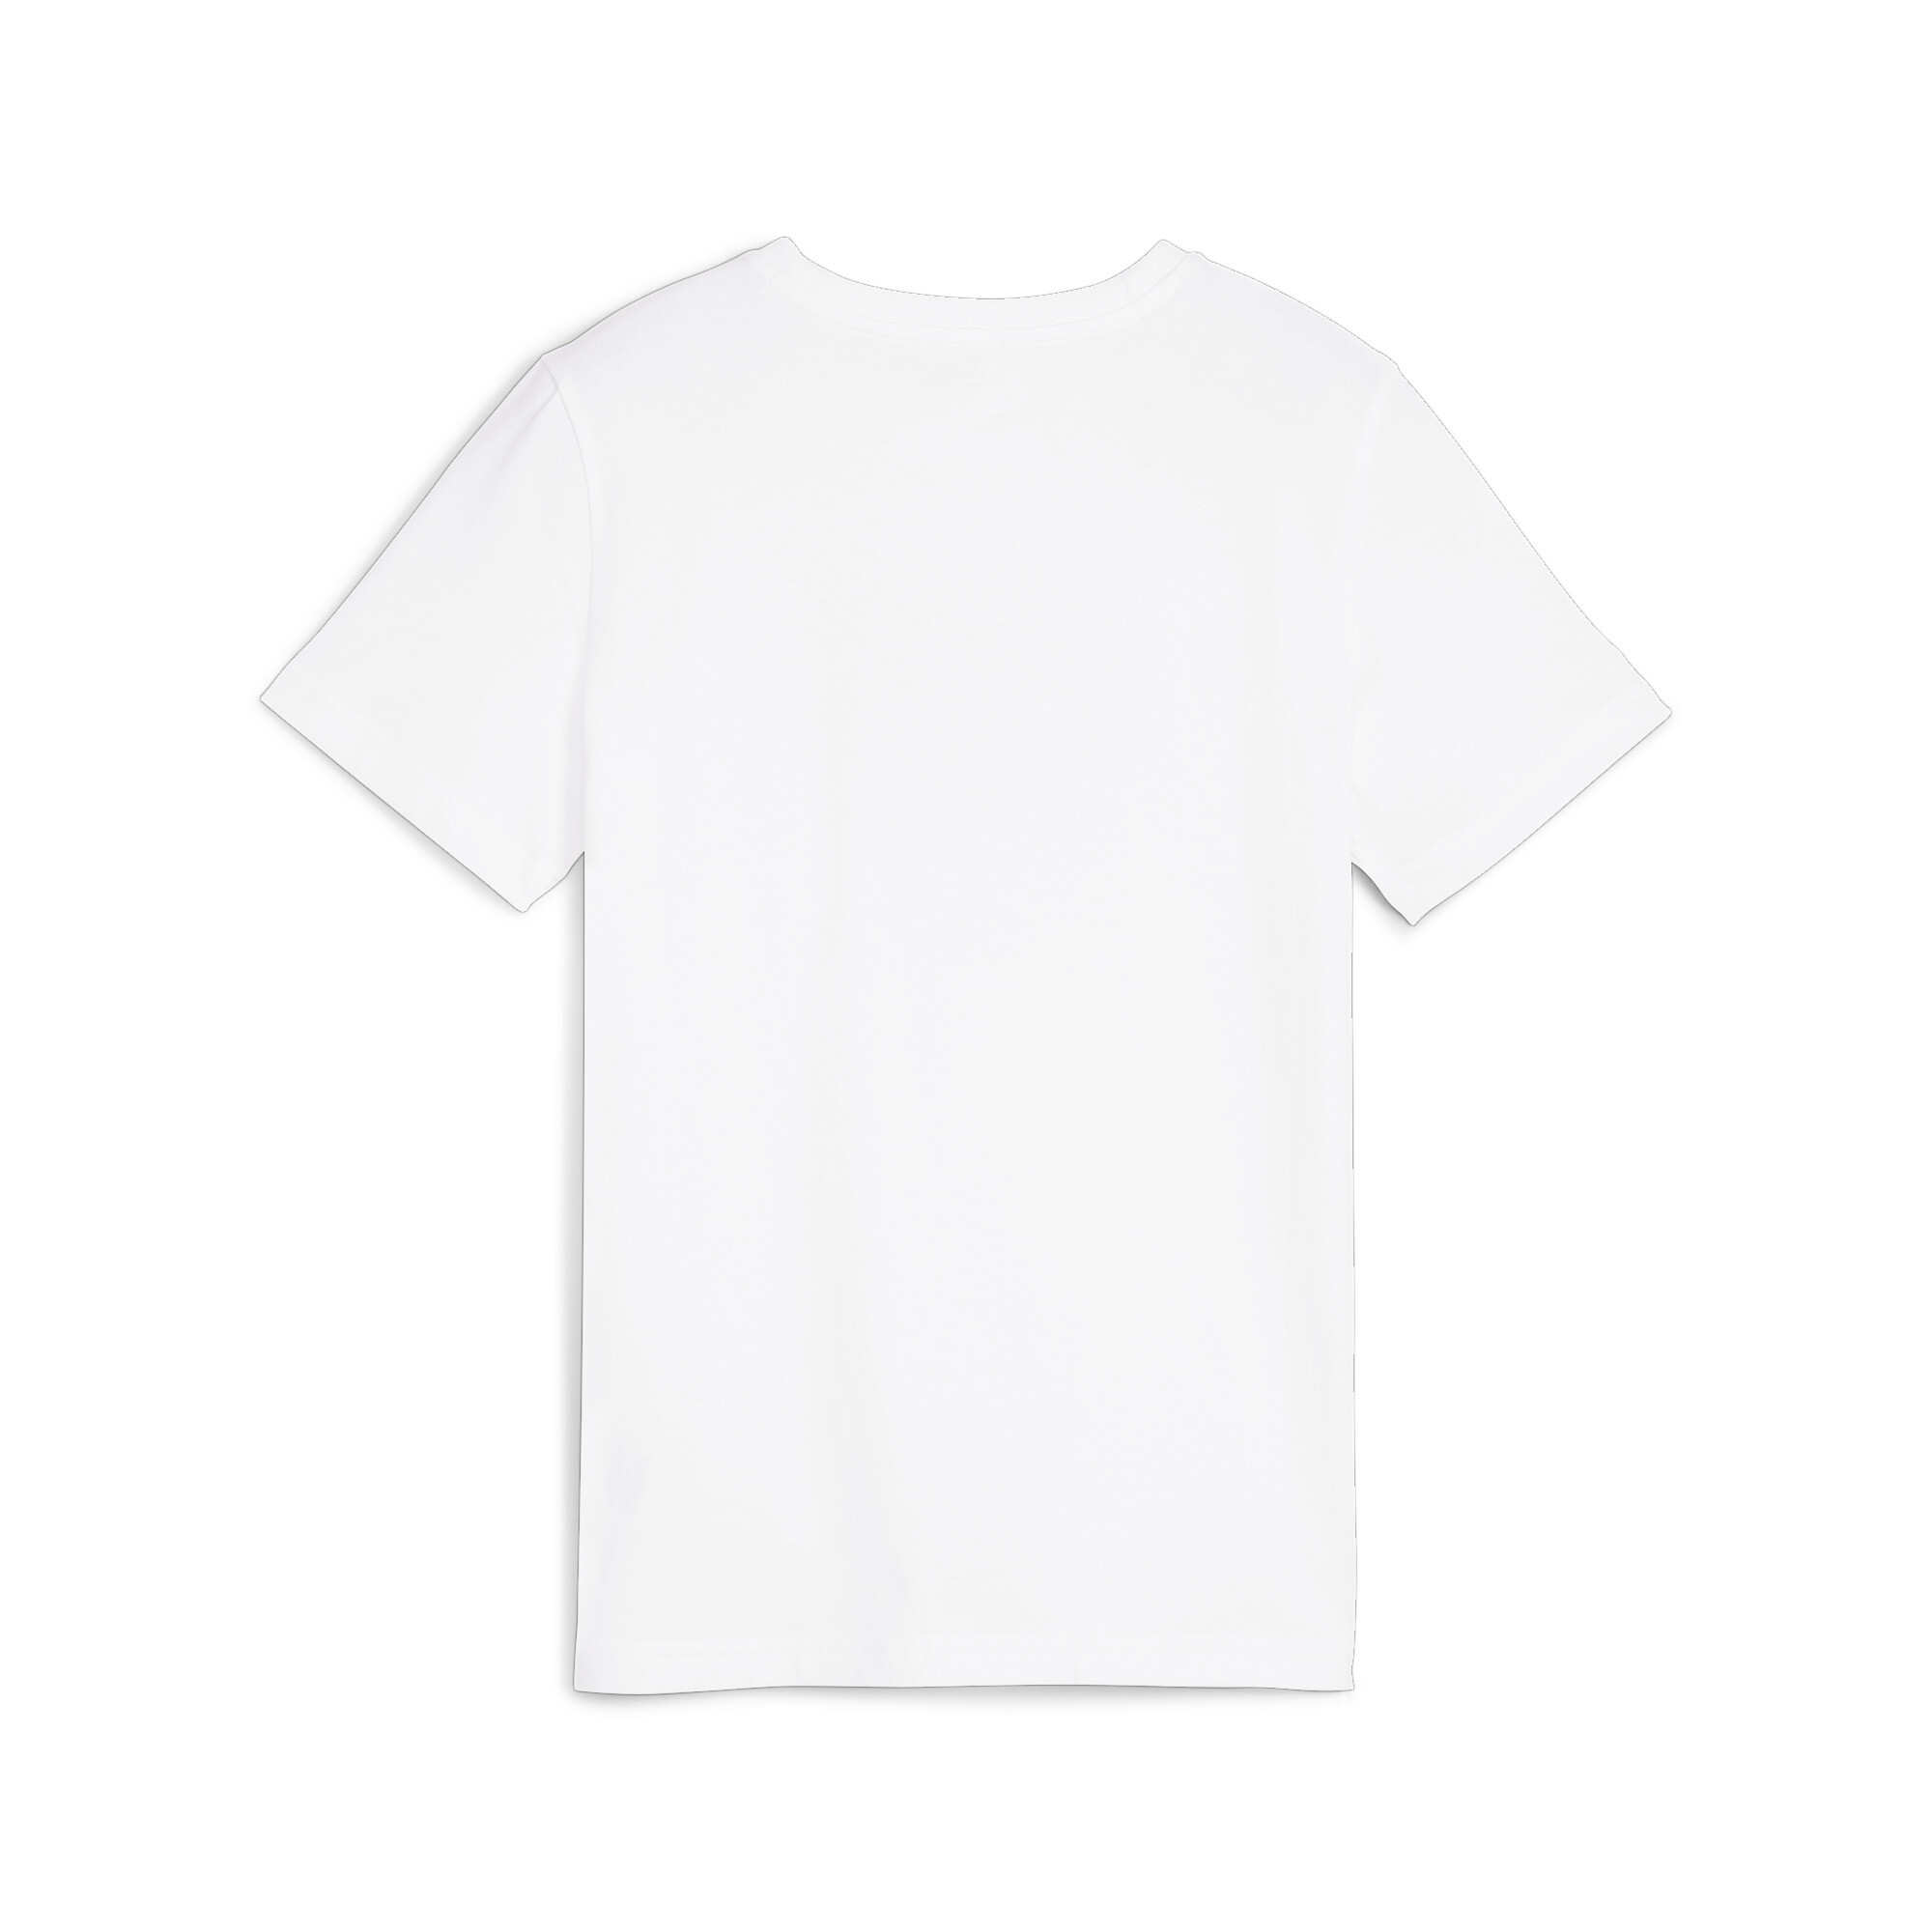 PUMA GRAPHICS Year Of Sports T-Shirt In 20 - White, Size 7-8 Youth